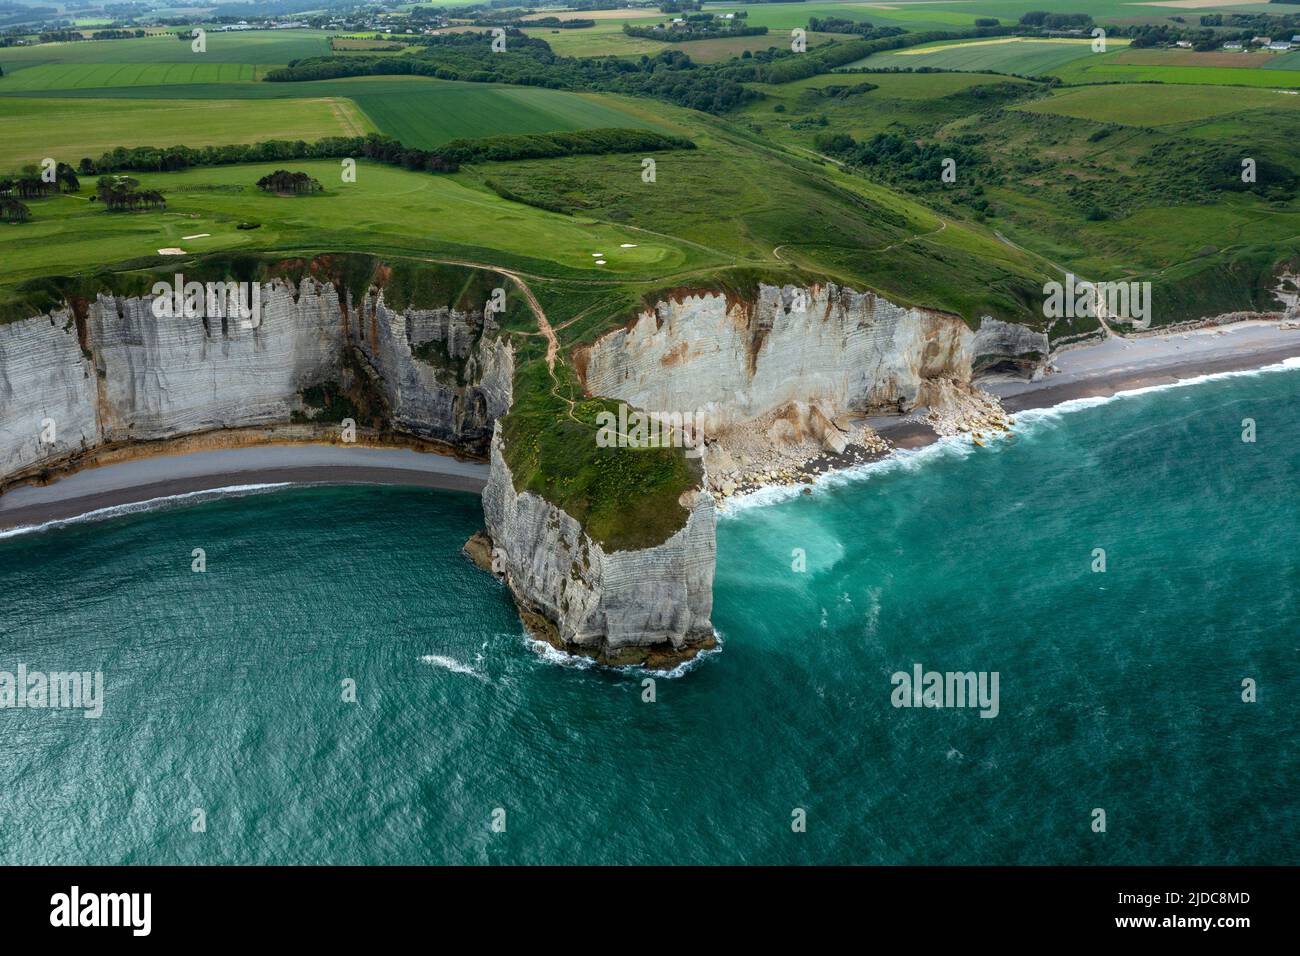 The famous White cliffs of Etretat and the Alabaster Coast, Seine-Maritime, Normandy, France. Stock Photo